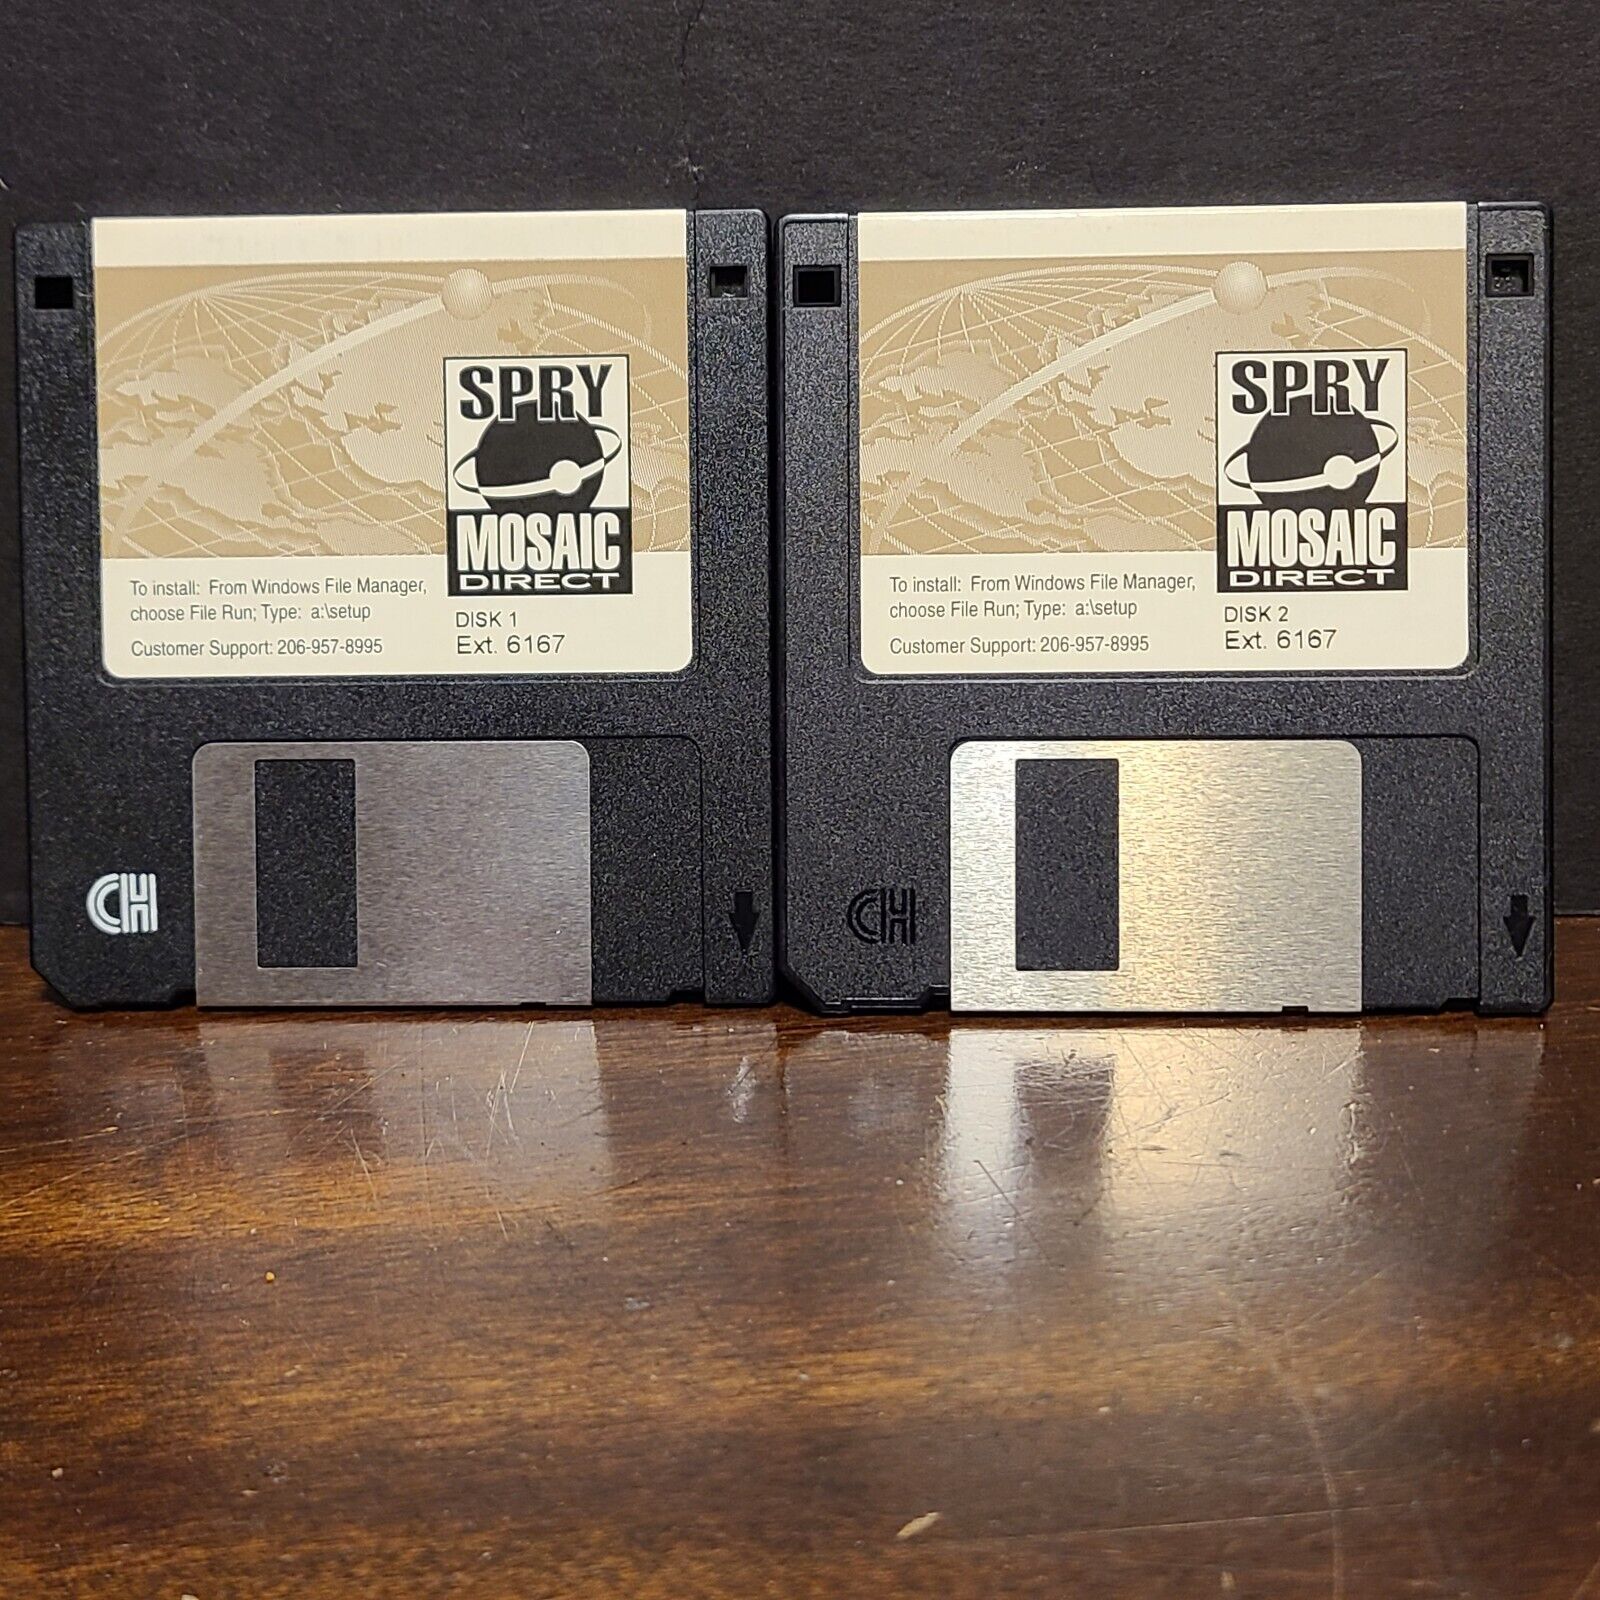 Vintage 1995 ● SPRY Mosaic Direct software ● disk 1 and 2 ext. 6167 dos program 